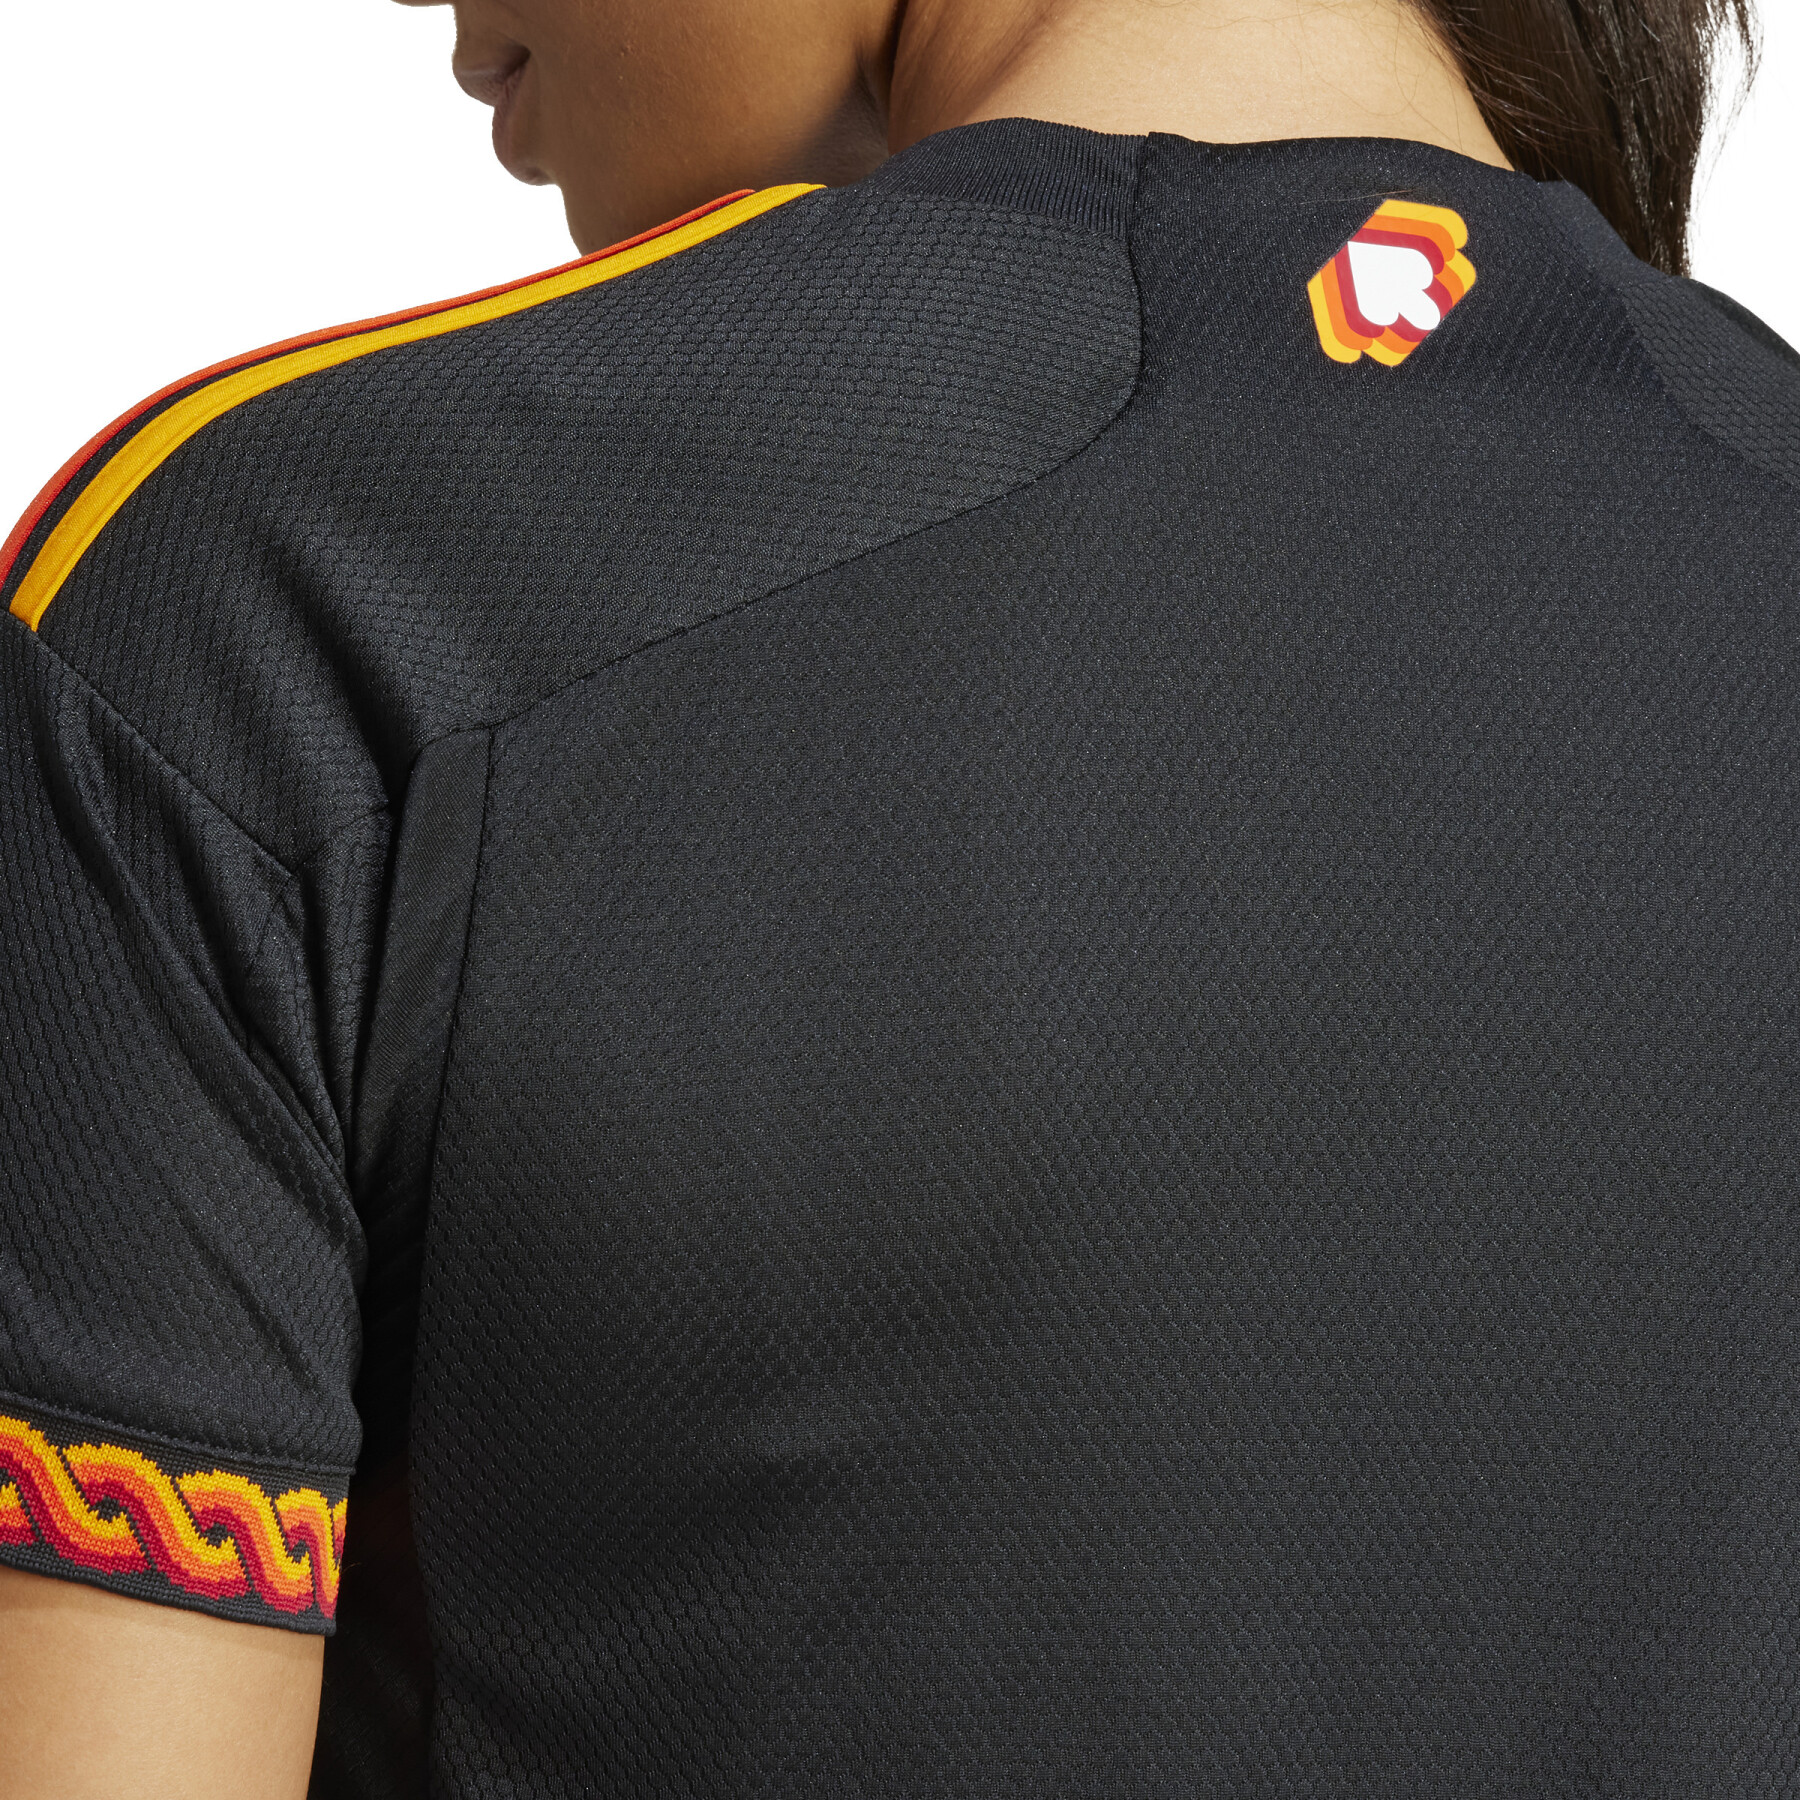 Maillot Third femme AS Roma 2023/24